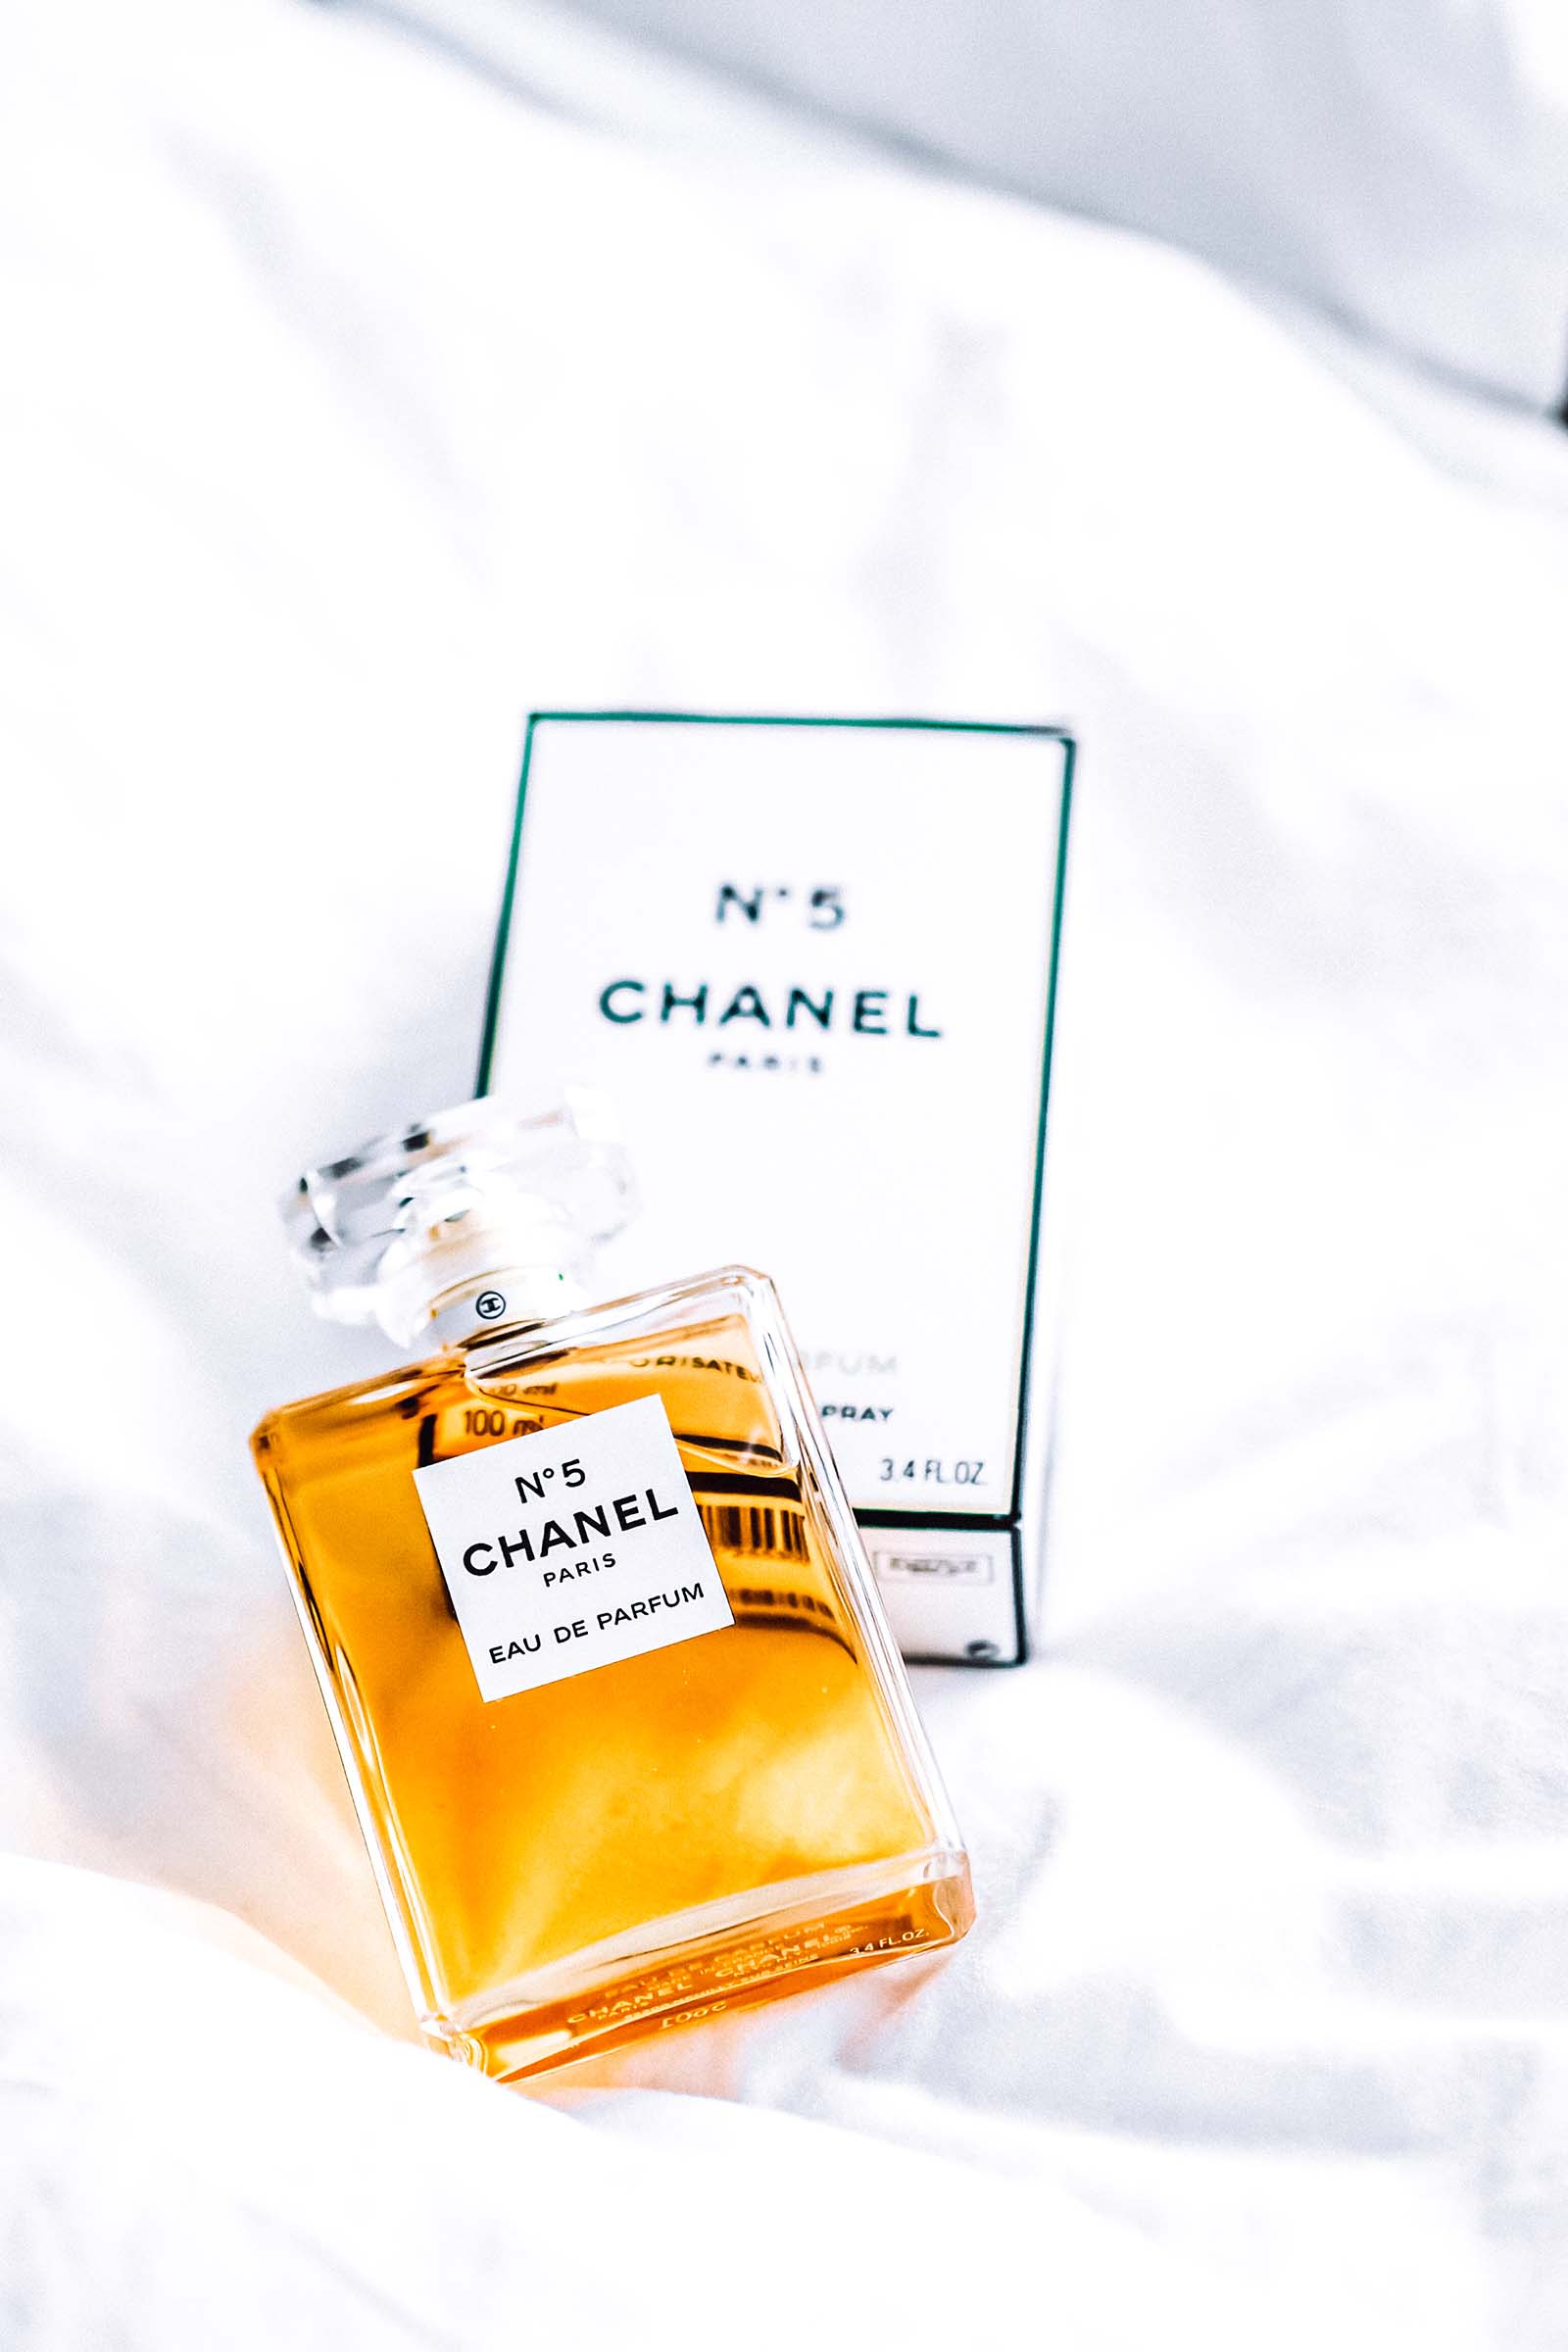 11 secrets you still don't know about Chanel No 5 (even though it's been  100 years)